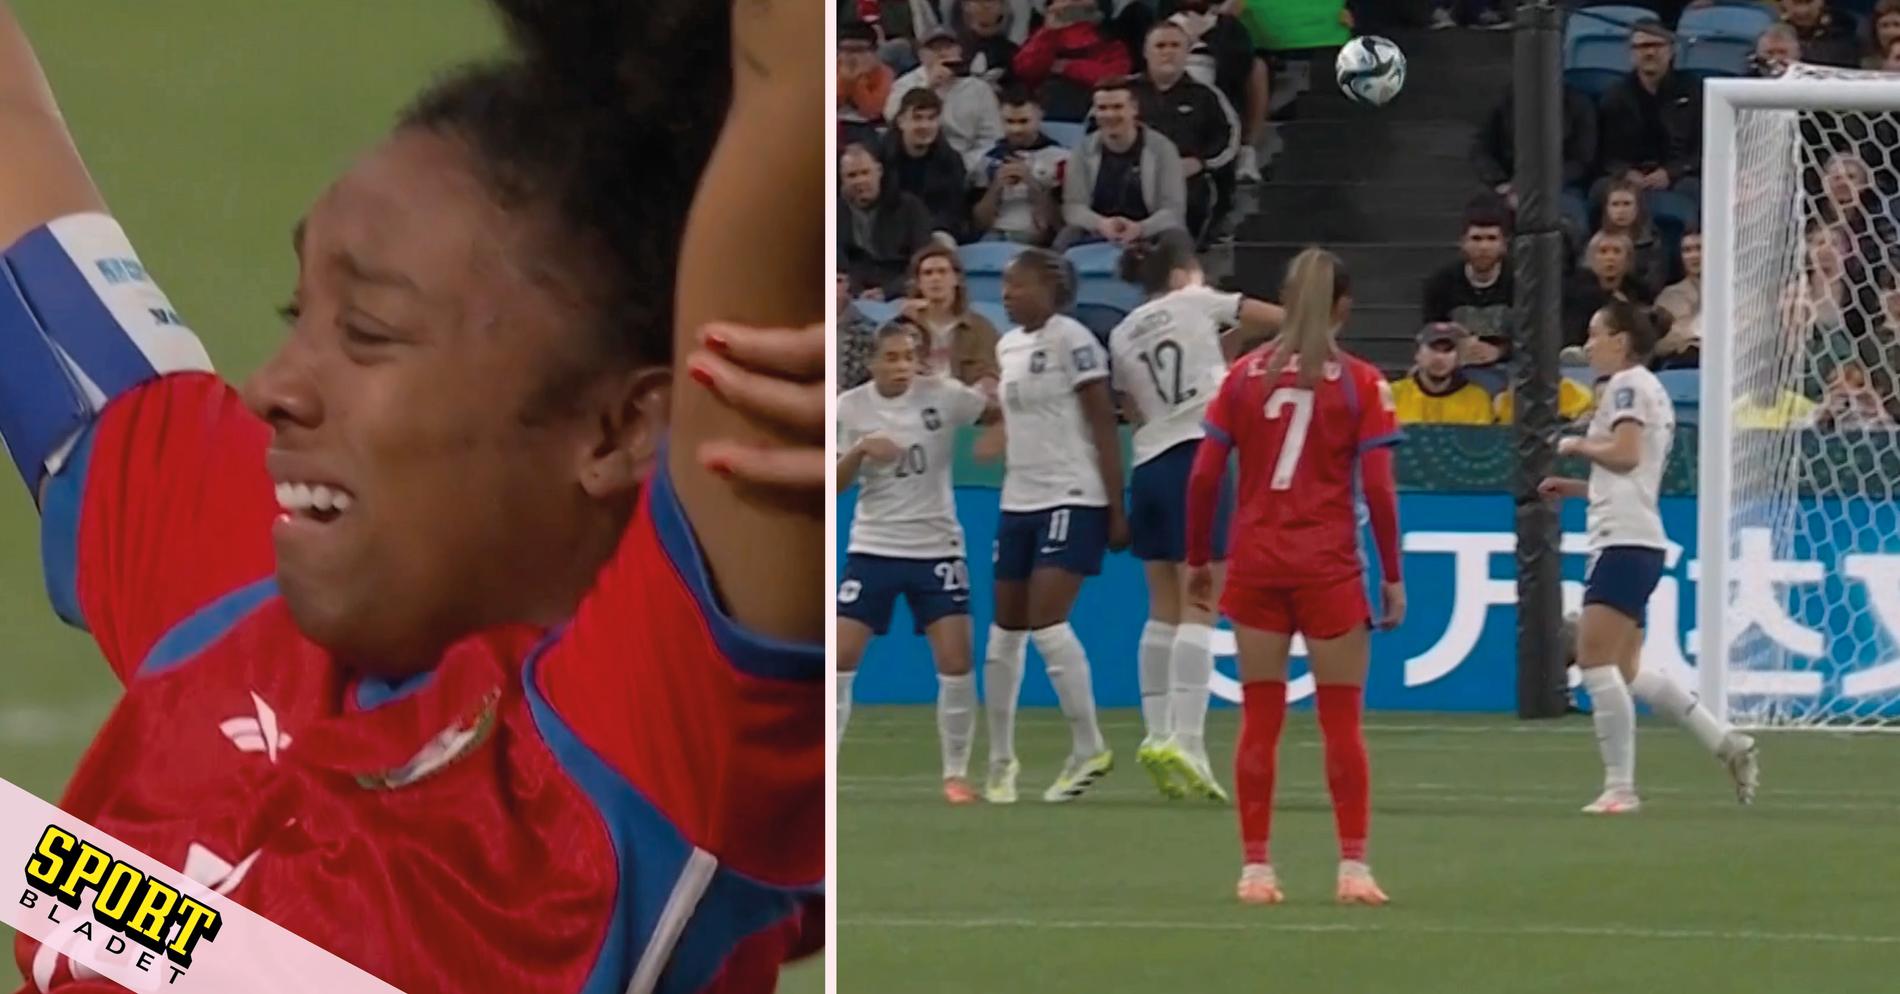 PANAMA’S HISTORIC WORLD CUP GOAL LEADS TO SHOCK AND JOY: Marta Cox’s Free Kick at the Crossbar